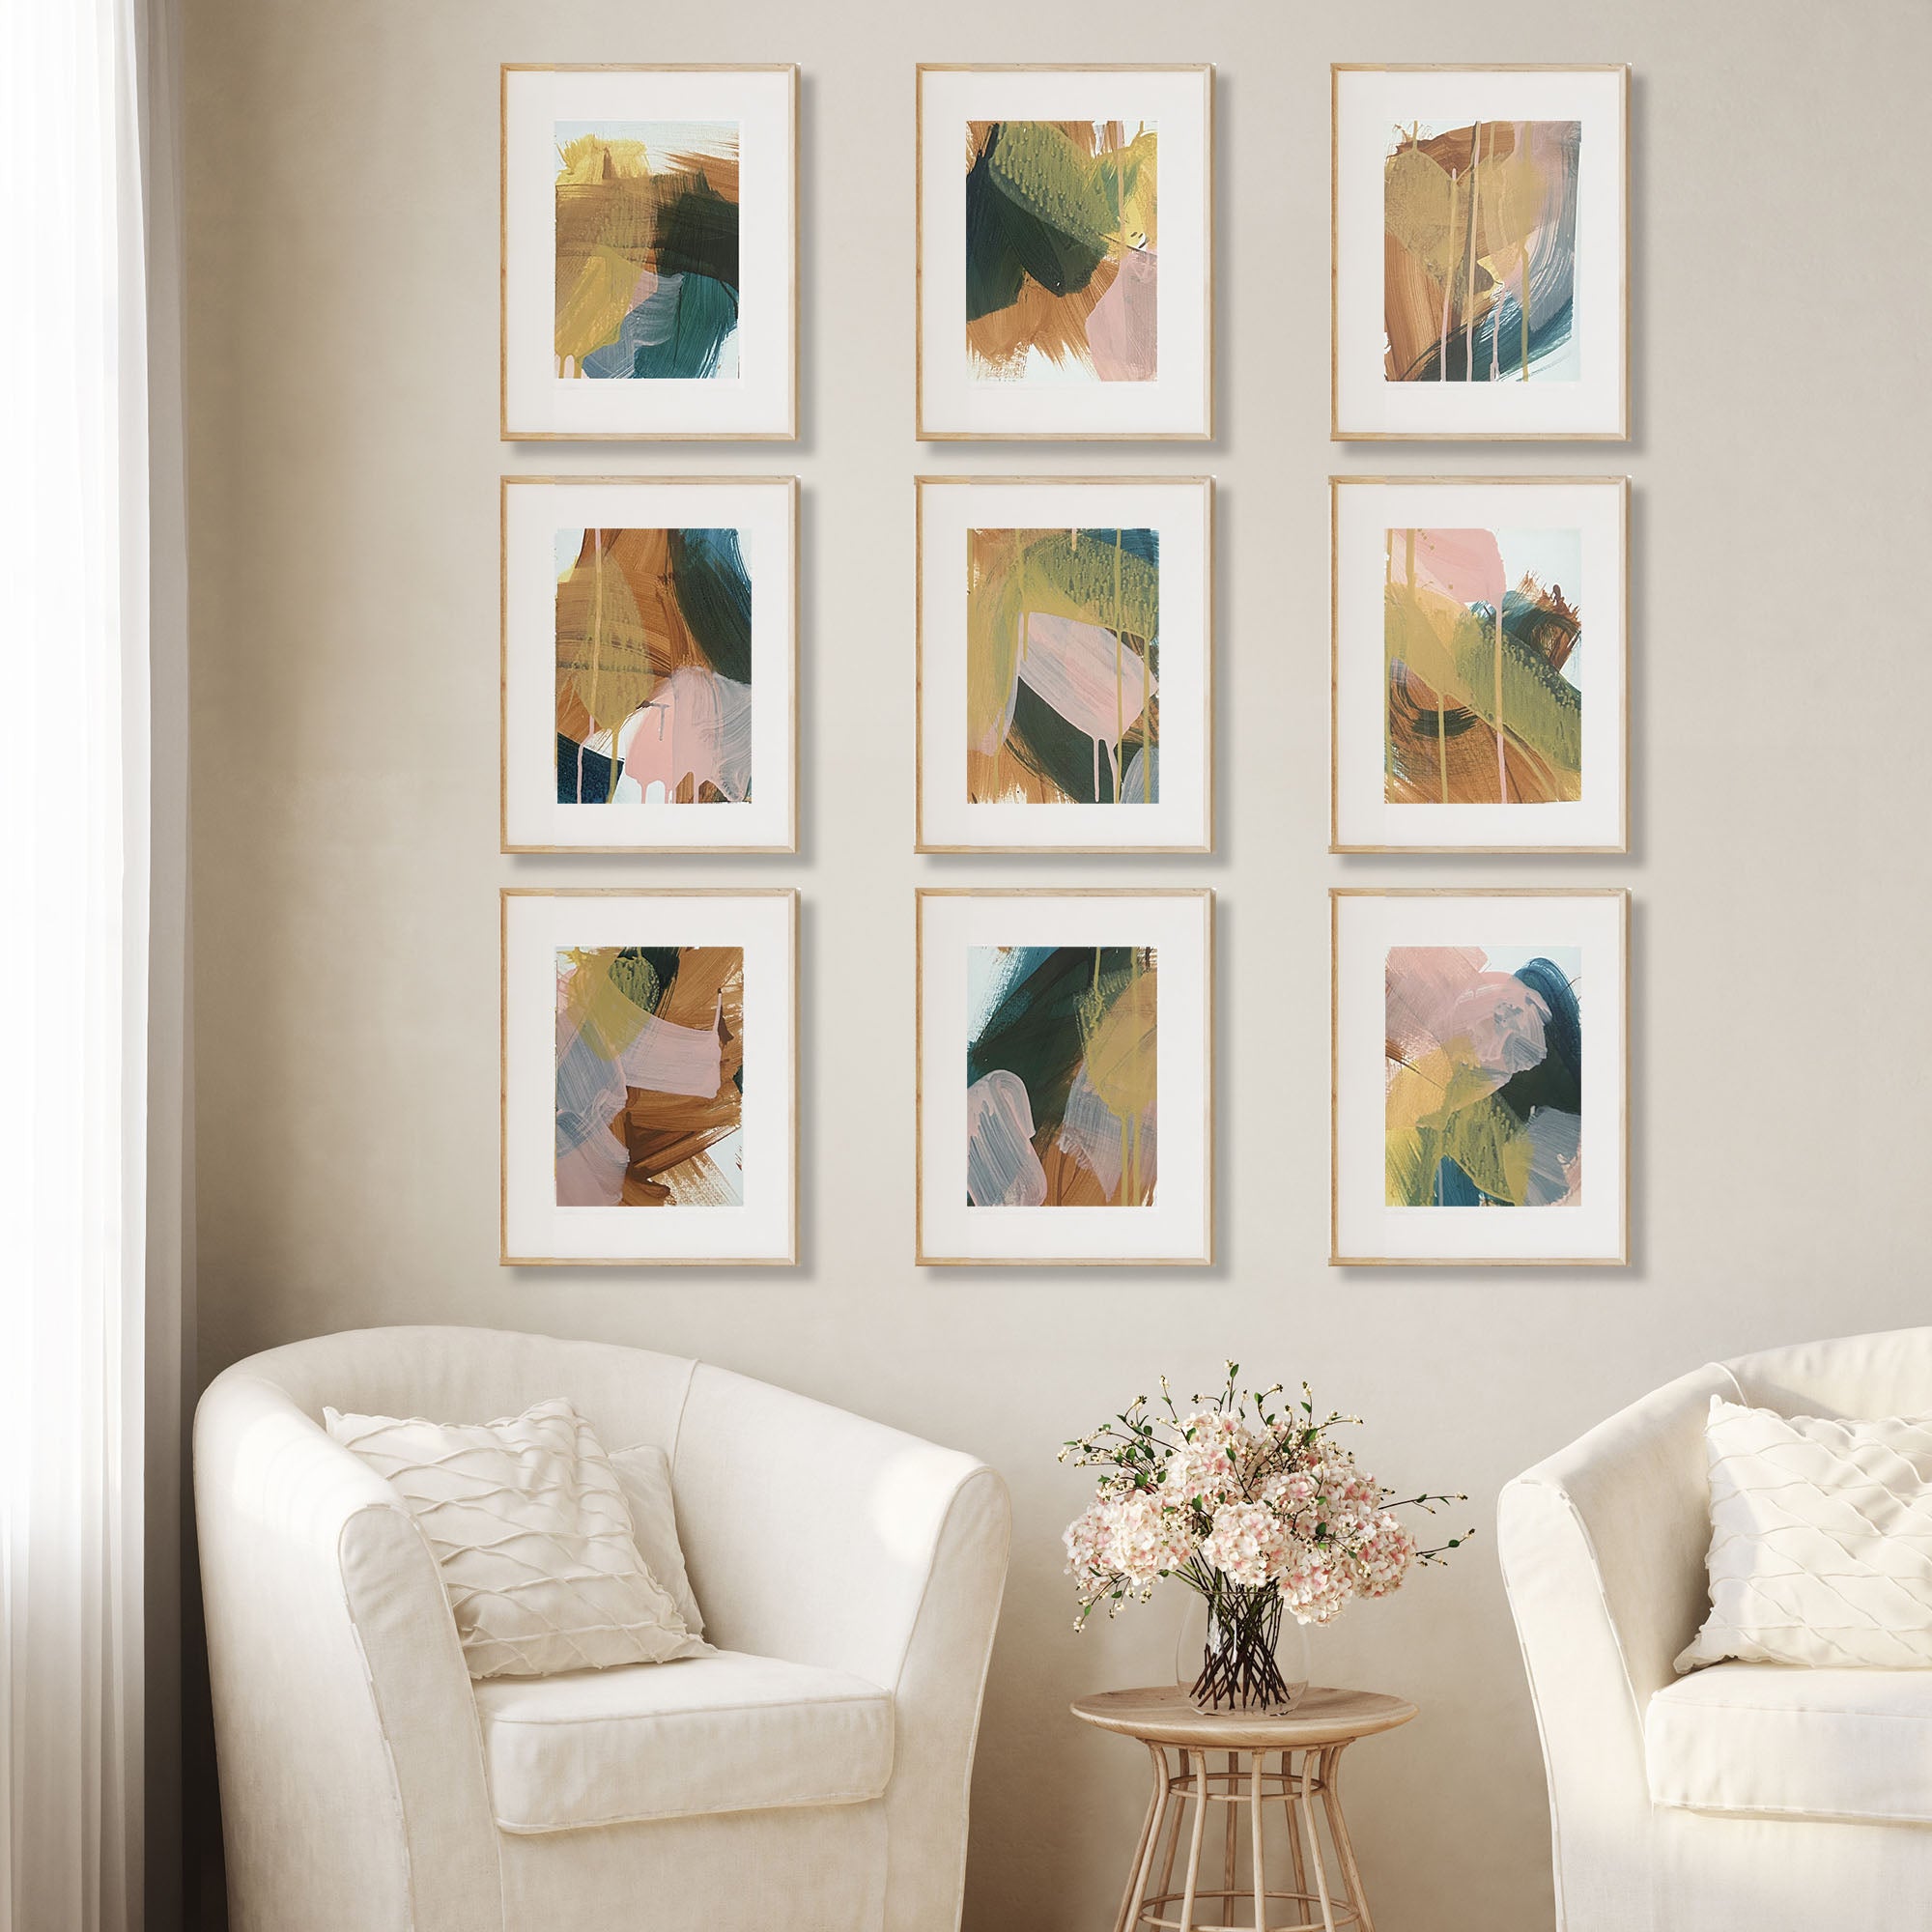 Silver Linings Original Painting Gallery Set-Abstract House